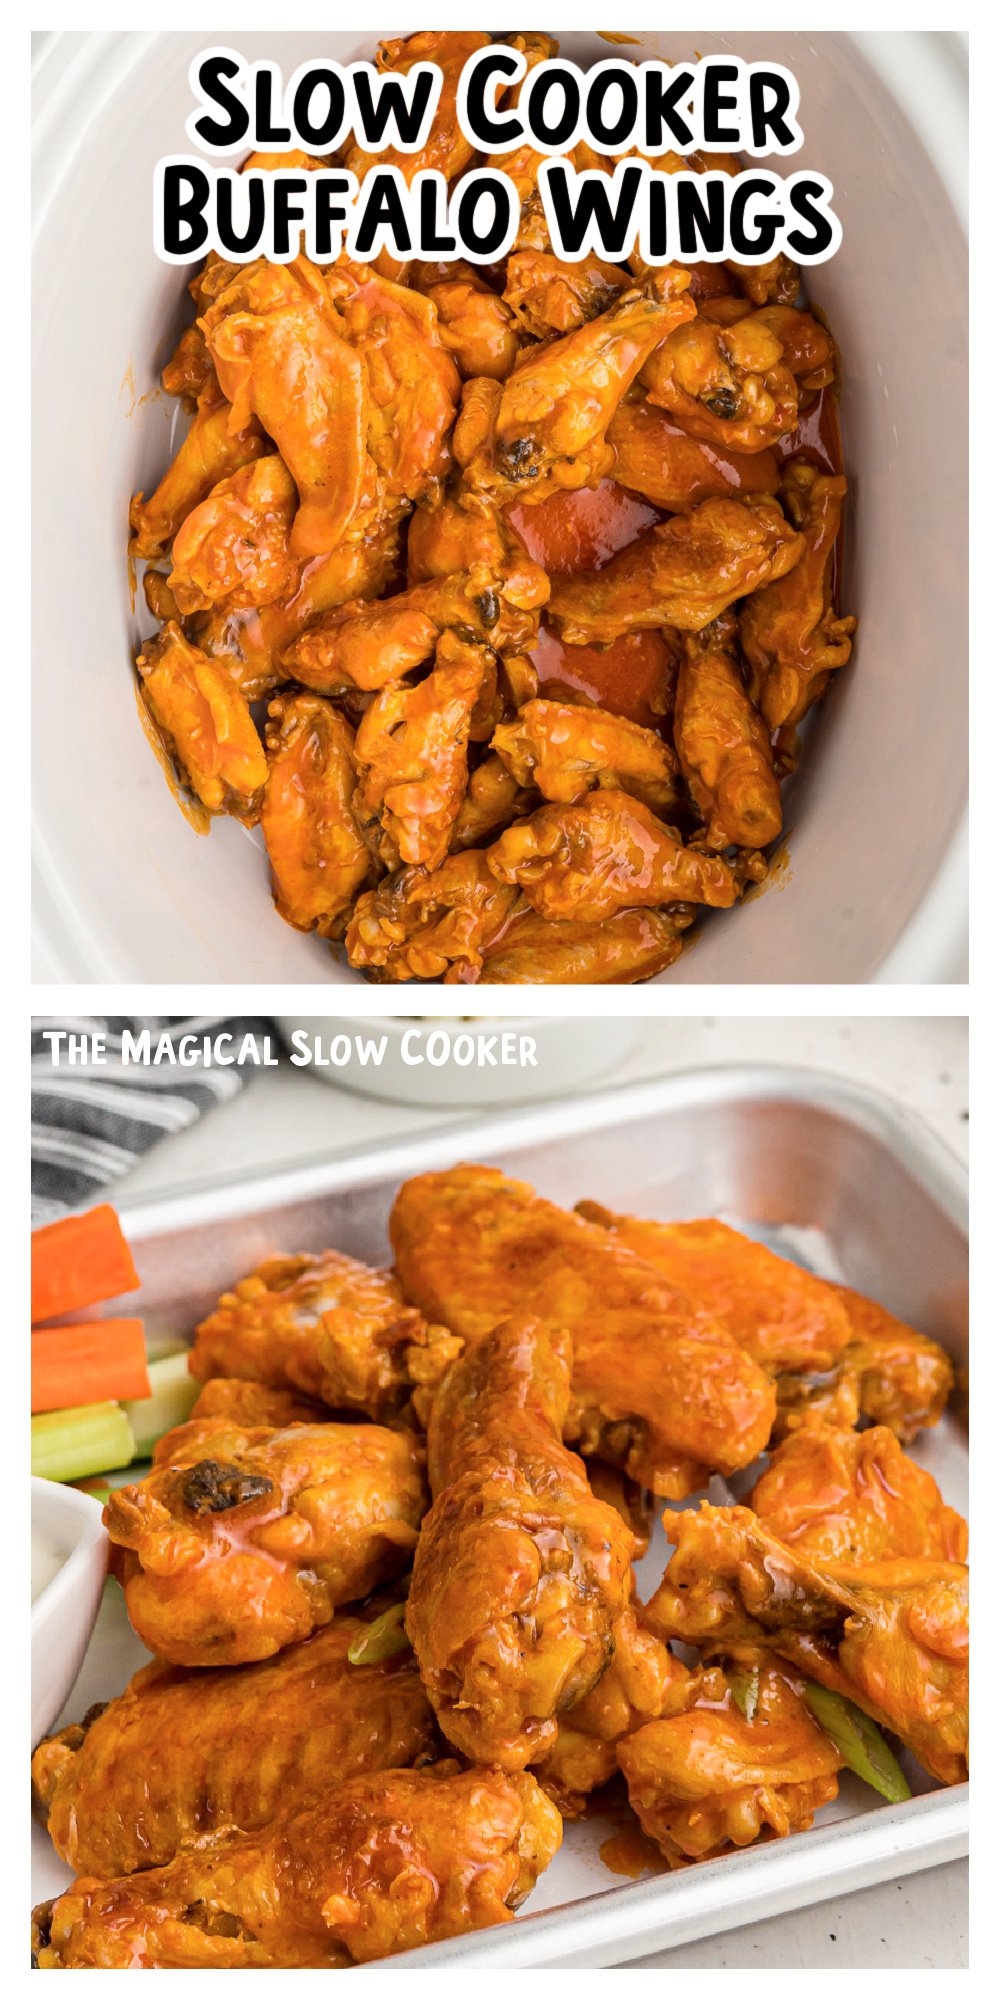 2 images of cooked chicken wings.